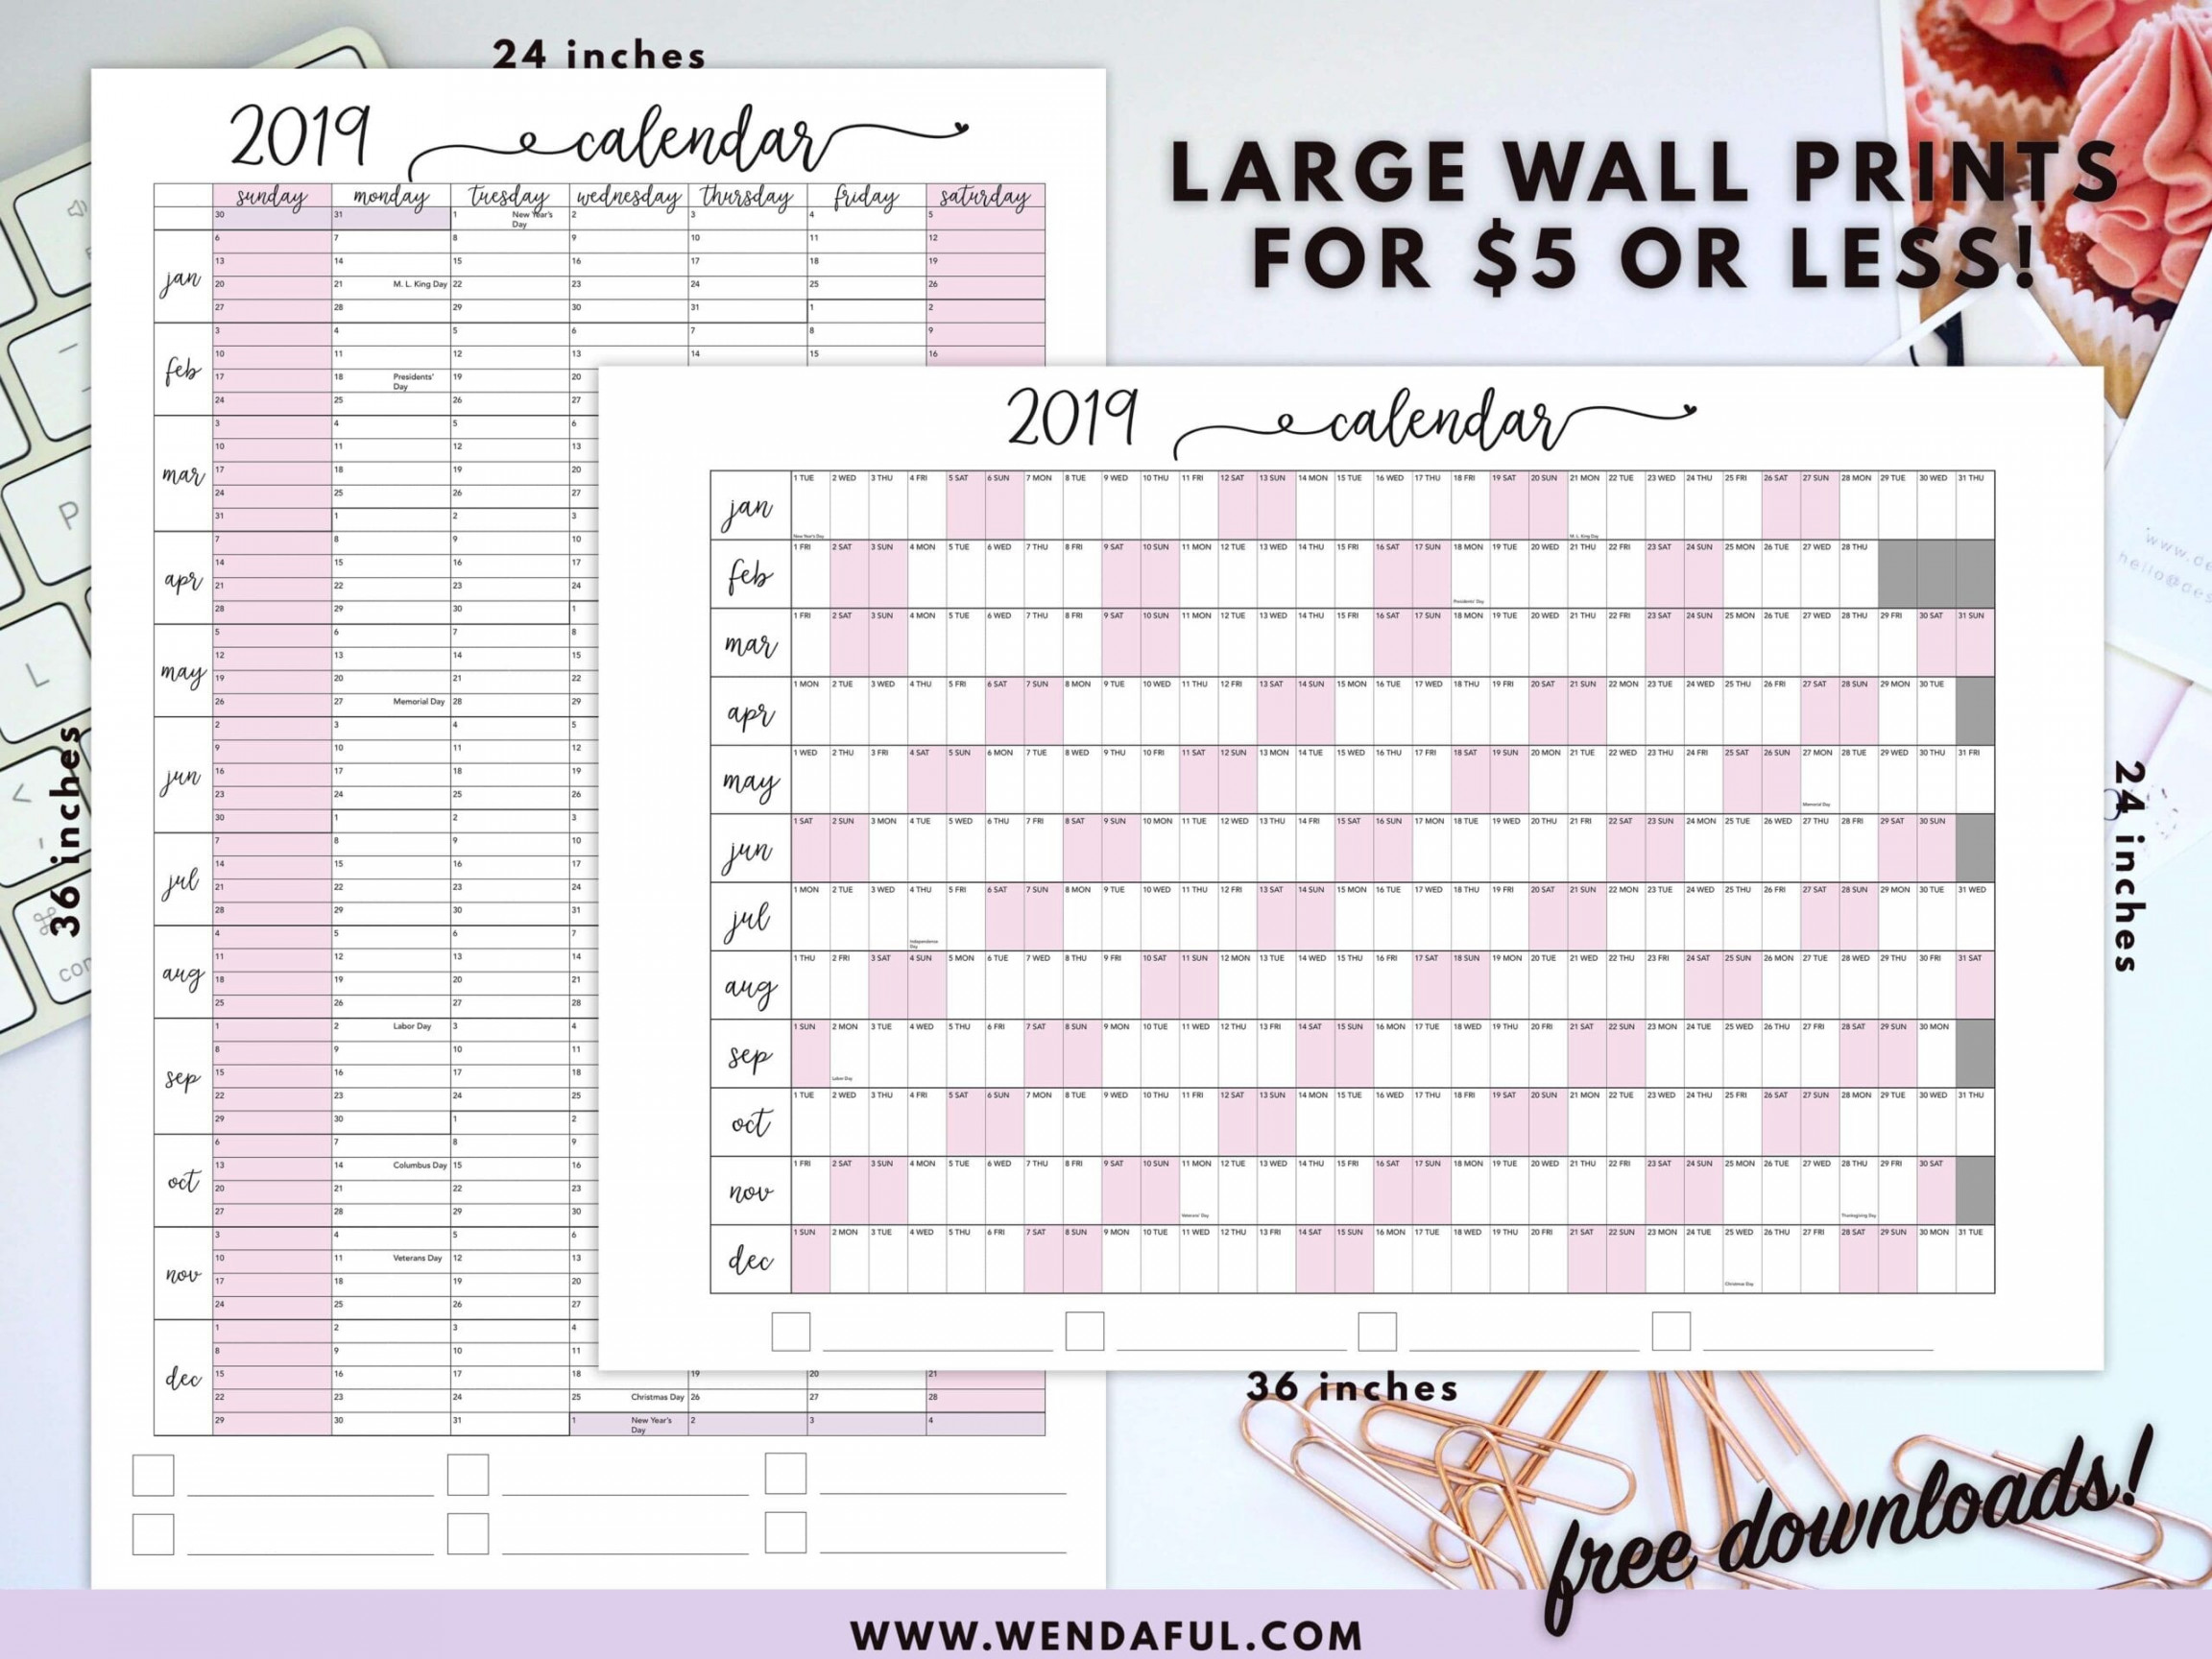 How To Make Your Own $ Wall Calendar - Wendaful Planning